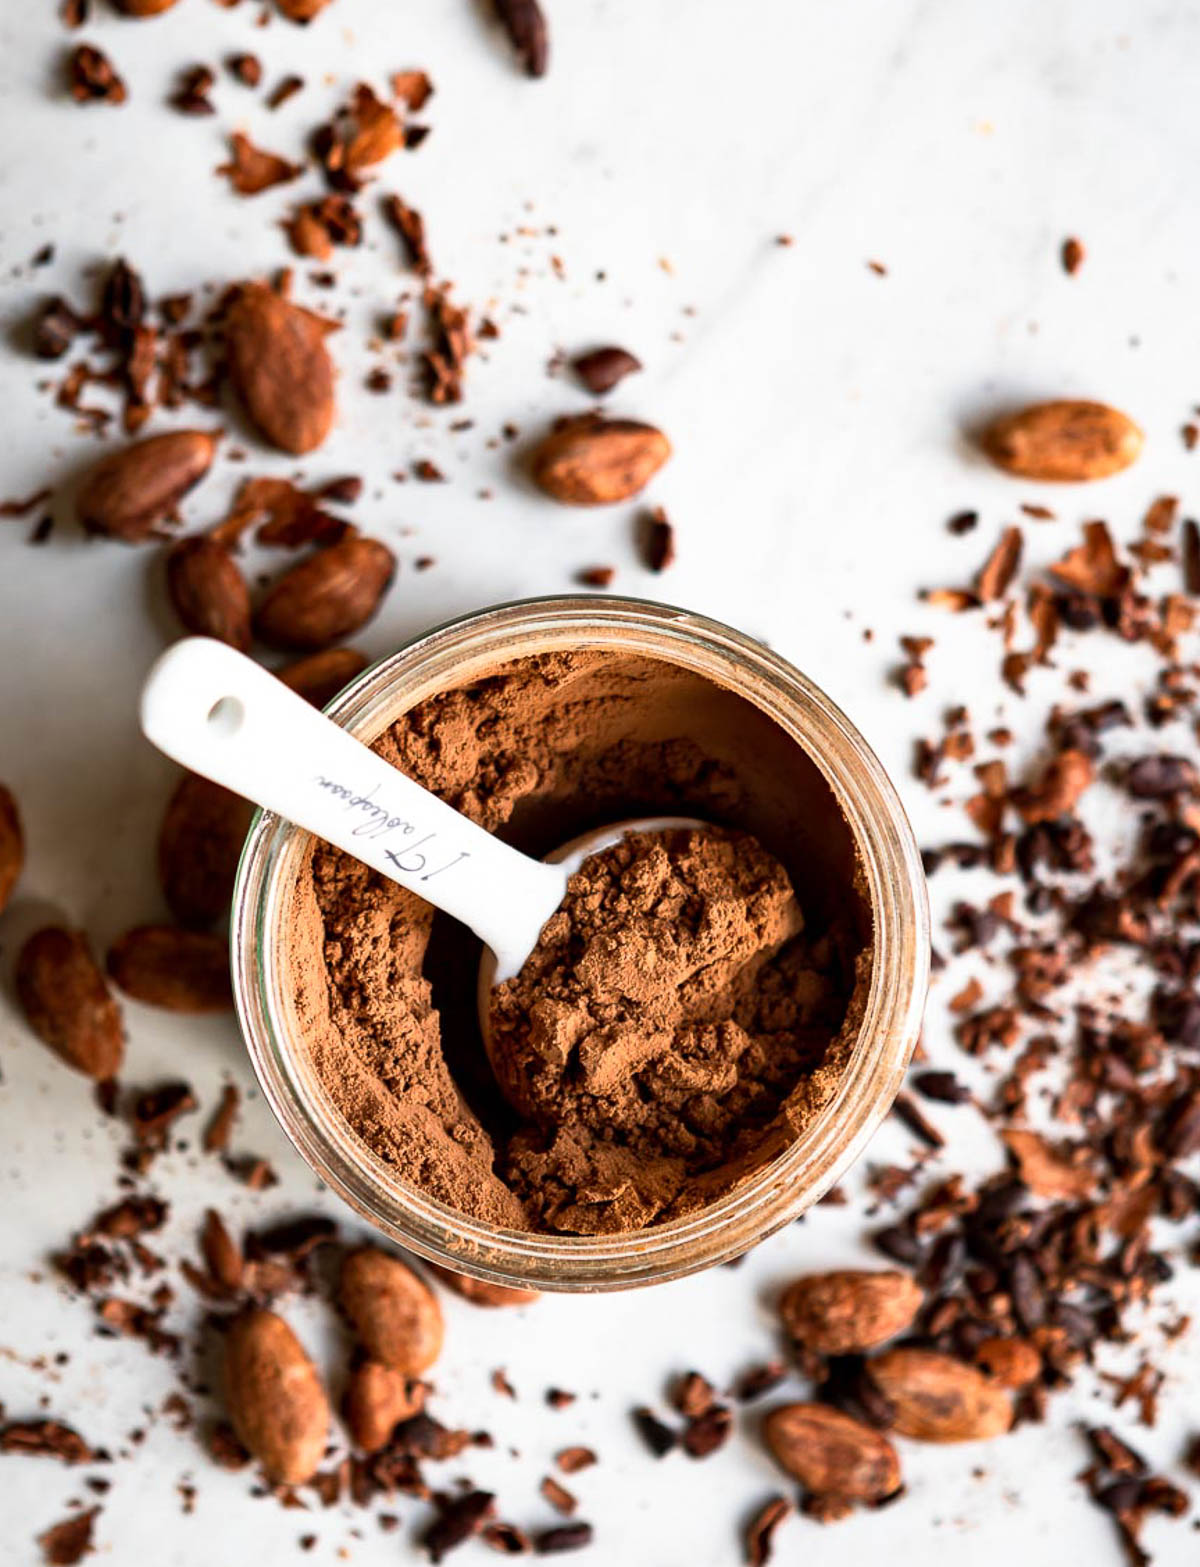 superfood cacao powder in a glass jar, getting scooped by a white tablespoon.